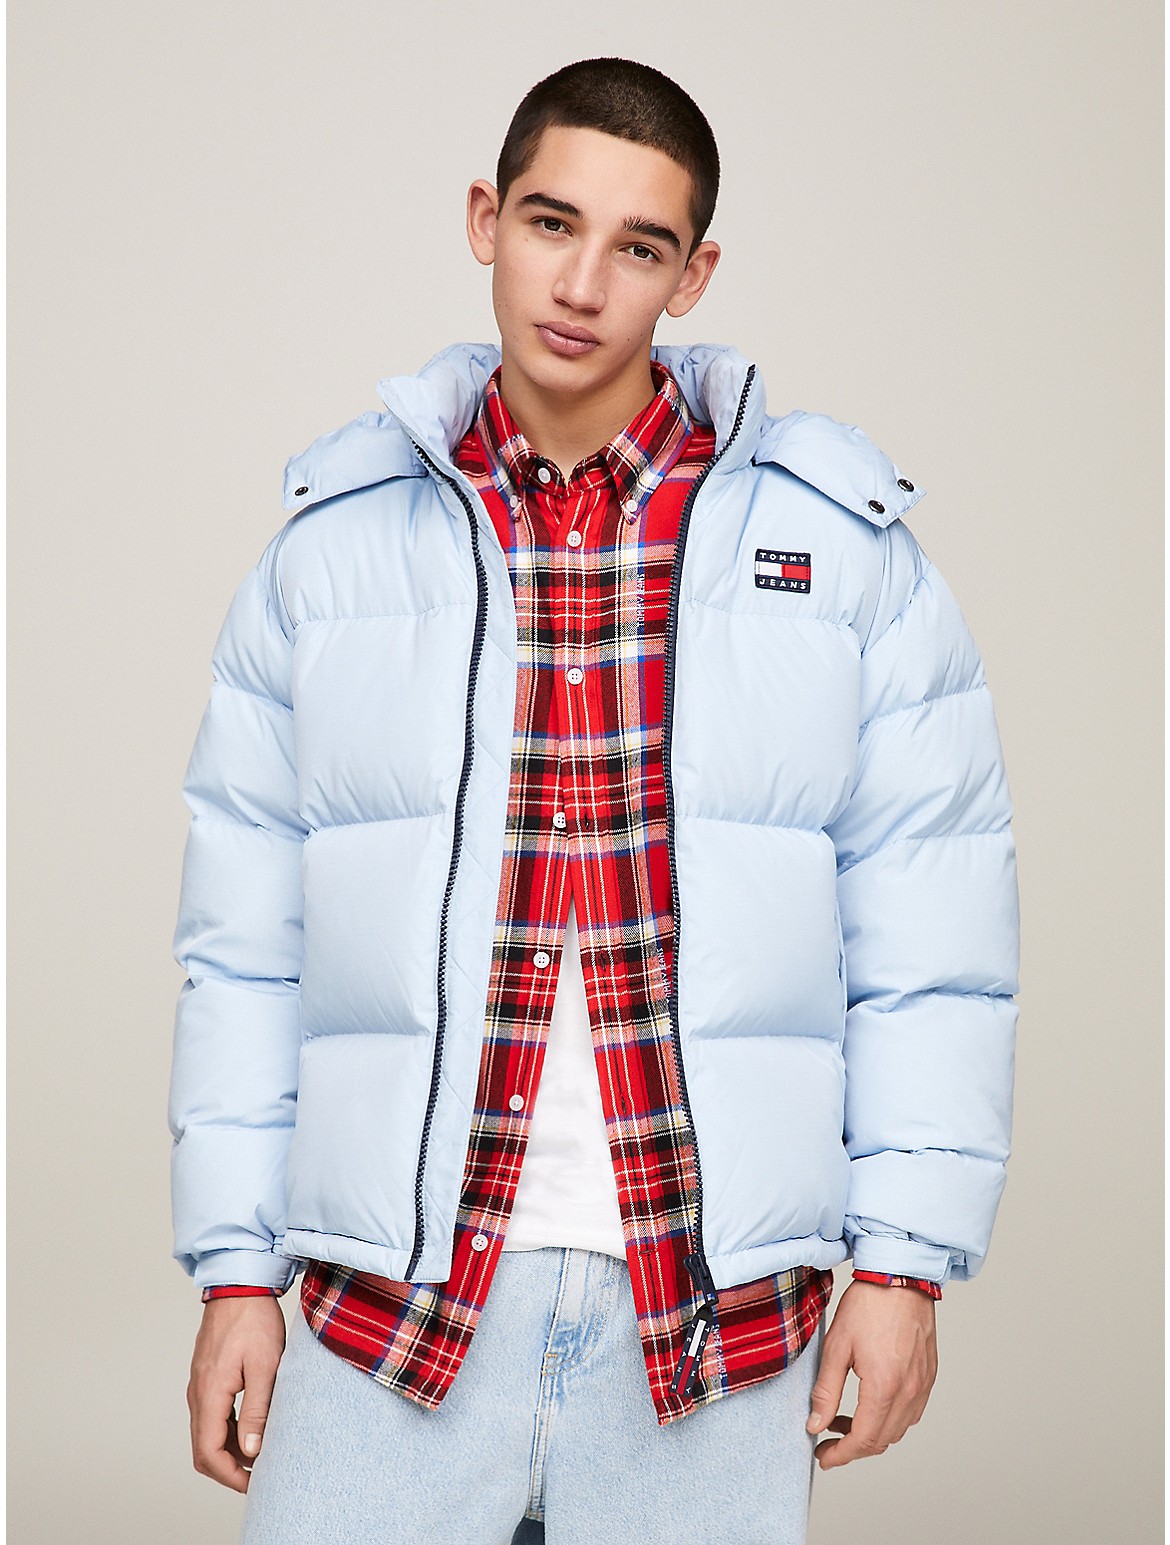 solid sovende frakobling Tommy Hilfiger The Alaska Solid Puffer Jacket In Chambray Blue | ModeSens